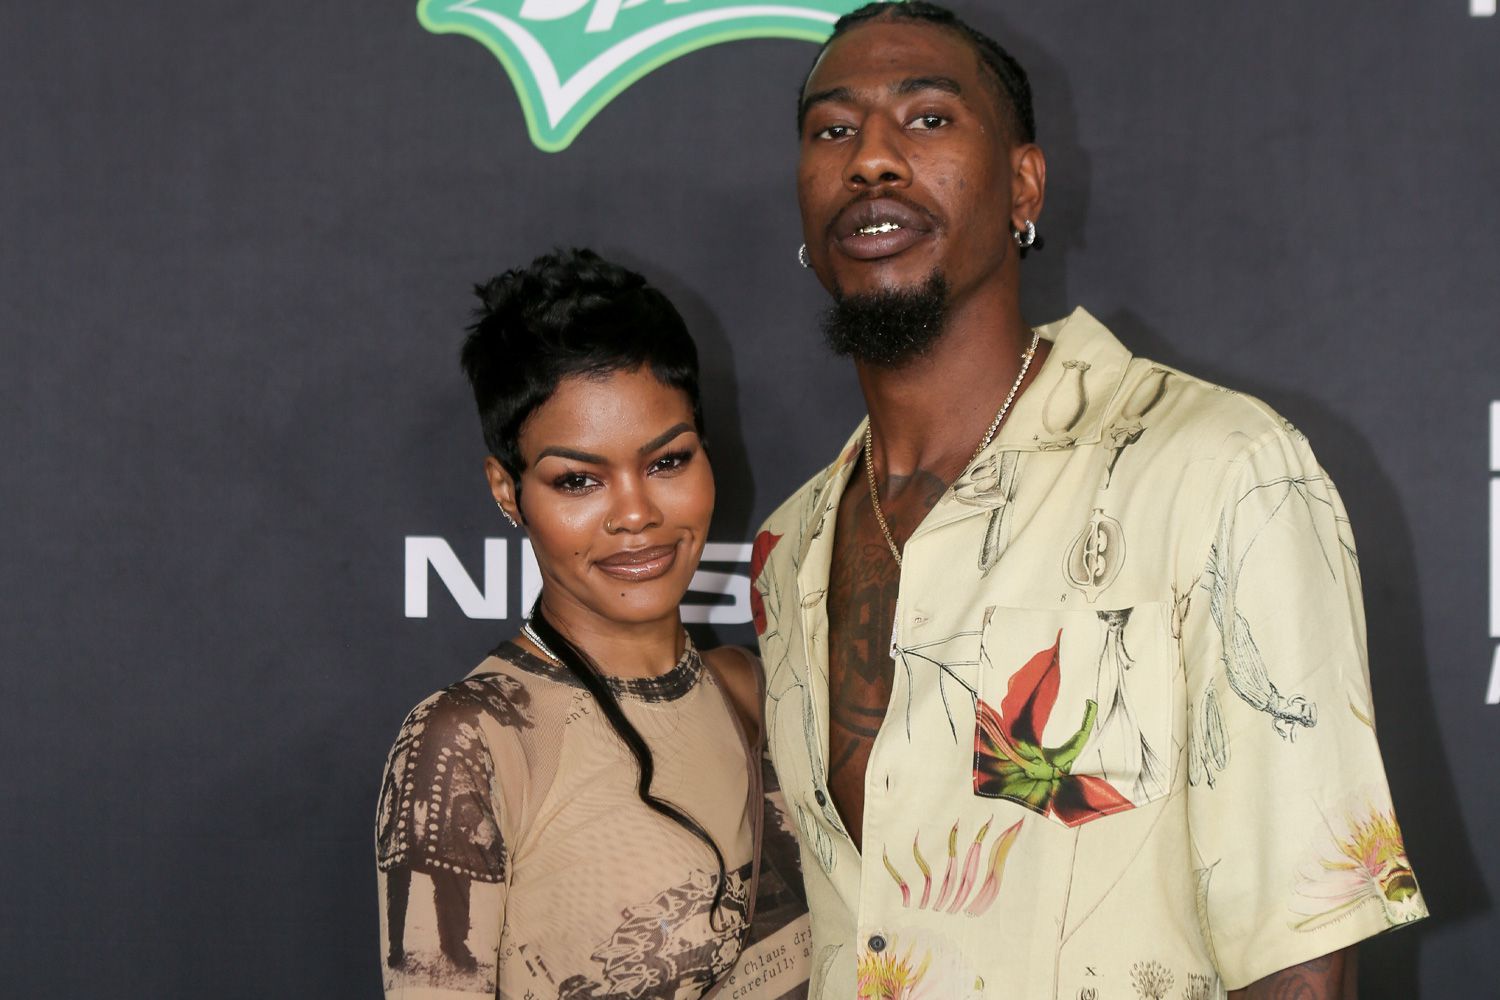 Teyana Taylor announces separation from Iman Shumpert - Entertainment Weekly News